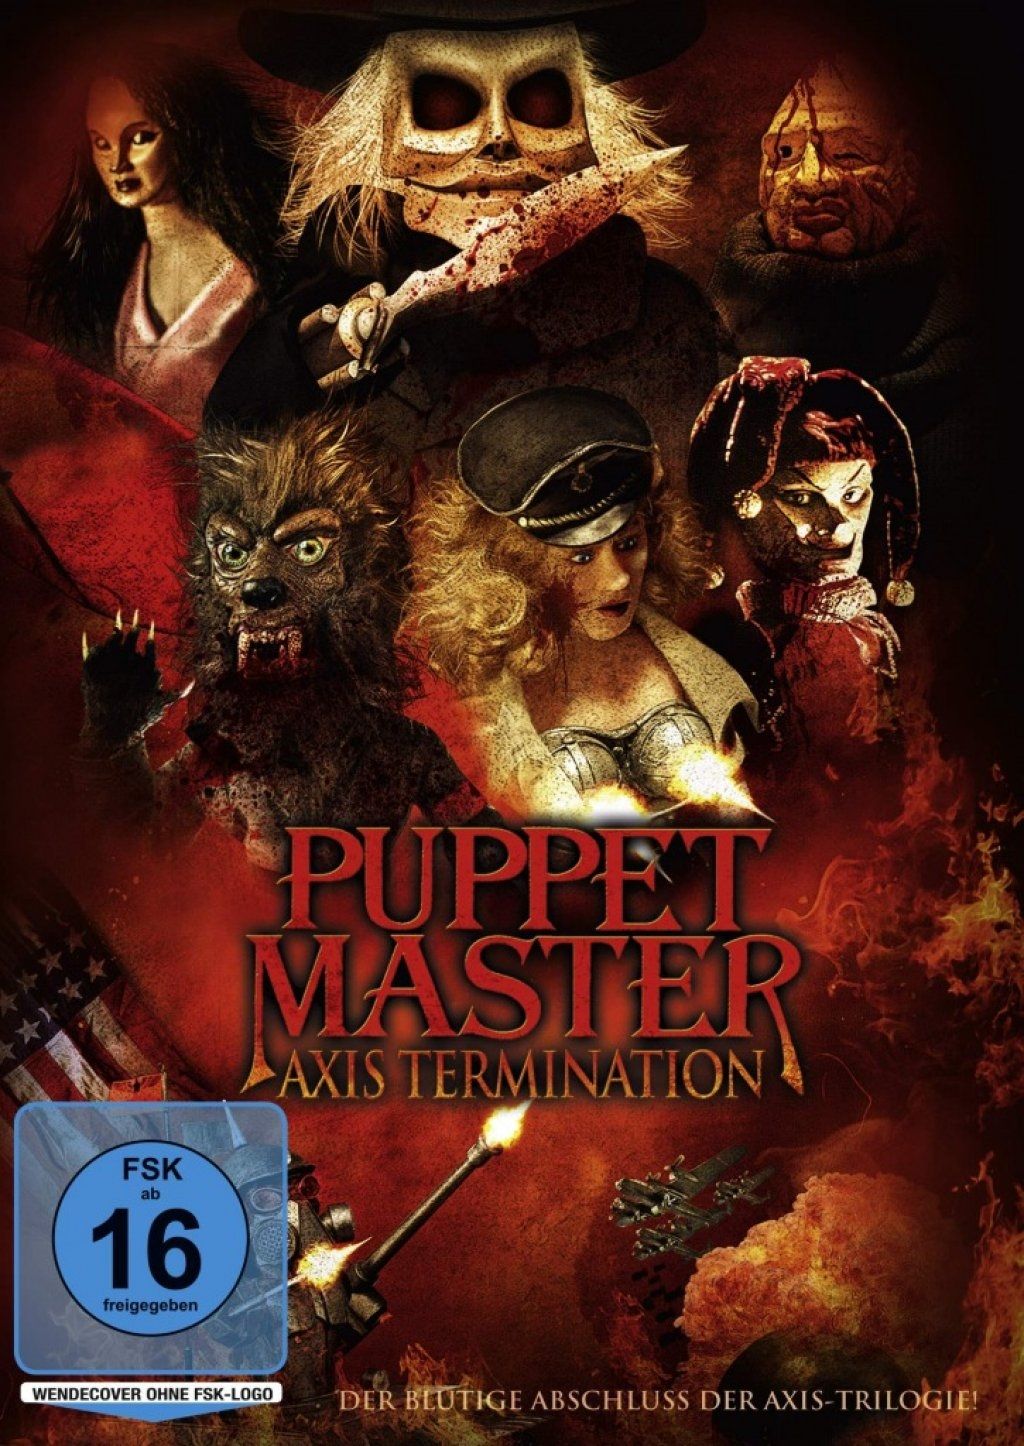 Puppet Master - Axis Termination